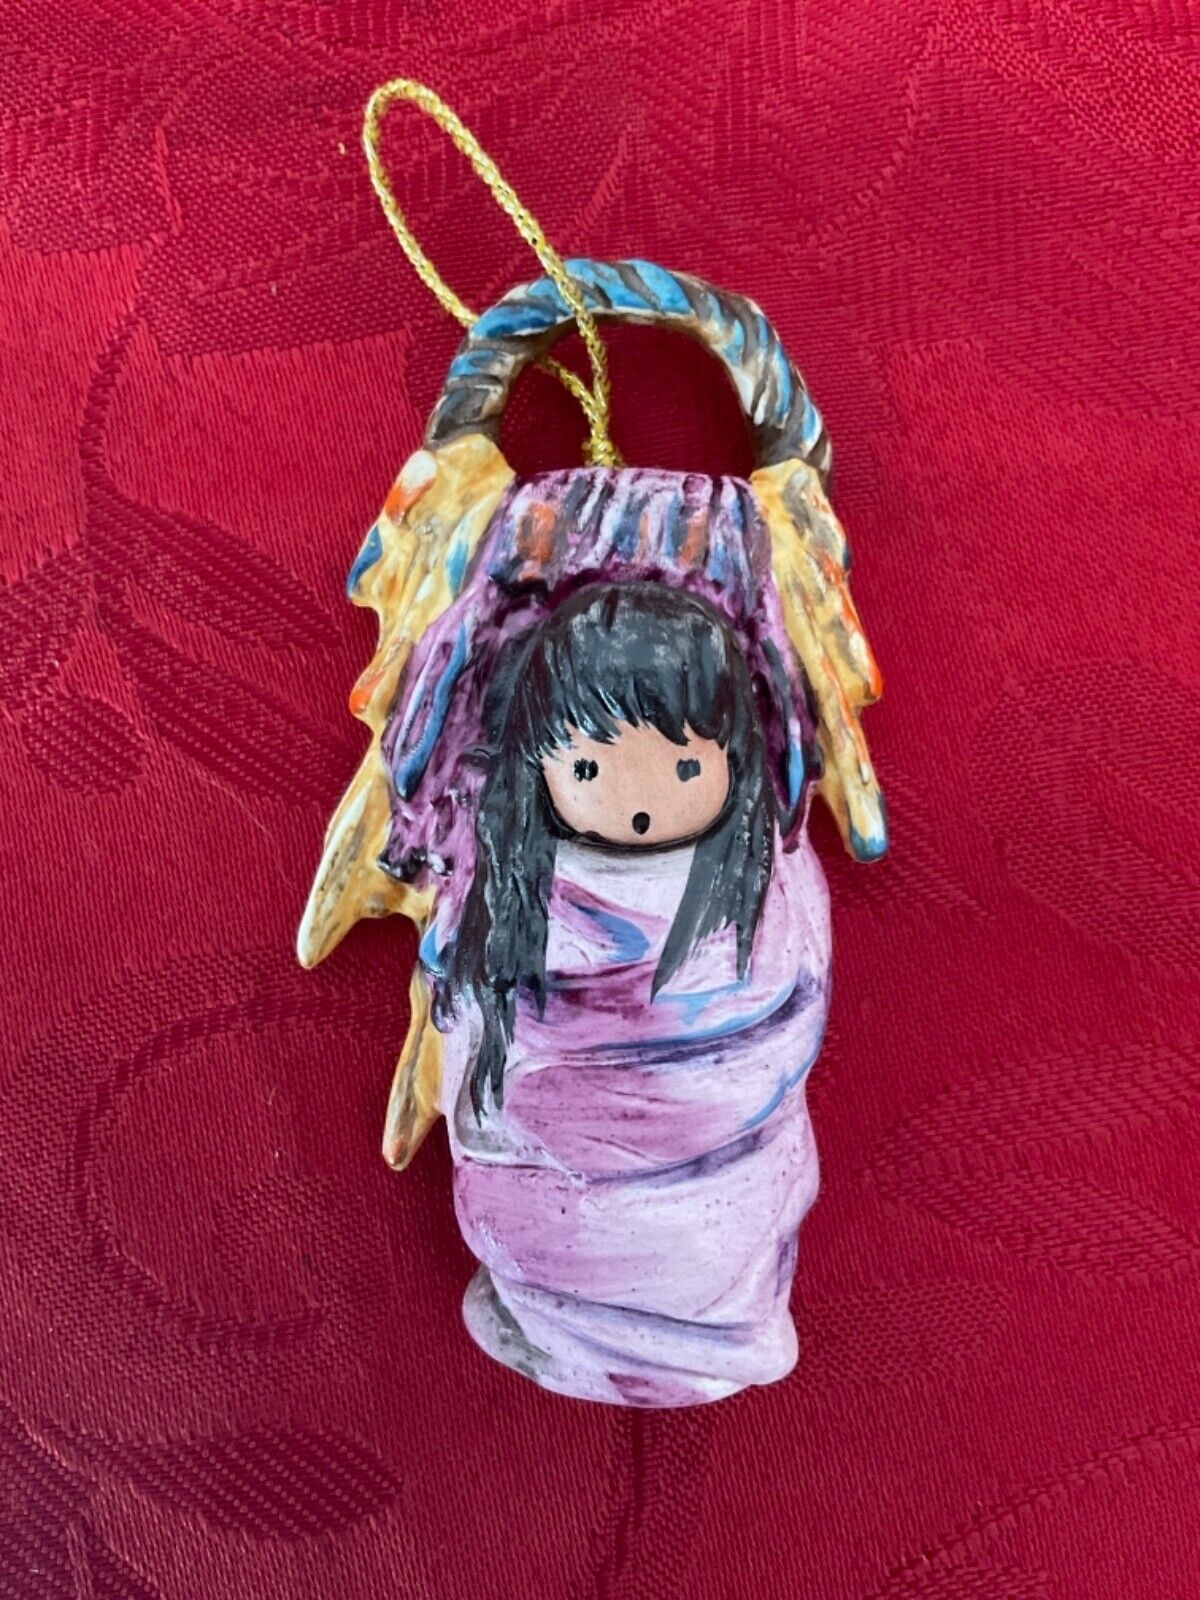 DEGRAZIA GOEBEL ORNAMENTS - CHOOSE FROM 6 DIFFERENT MODELS